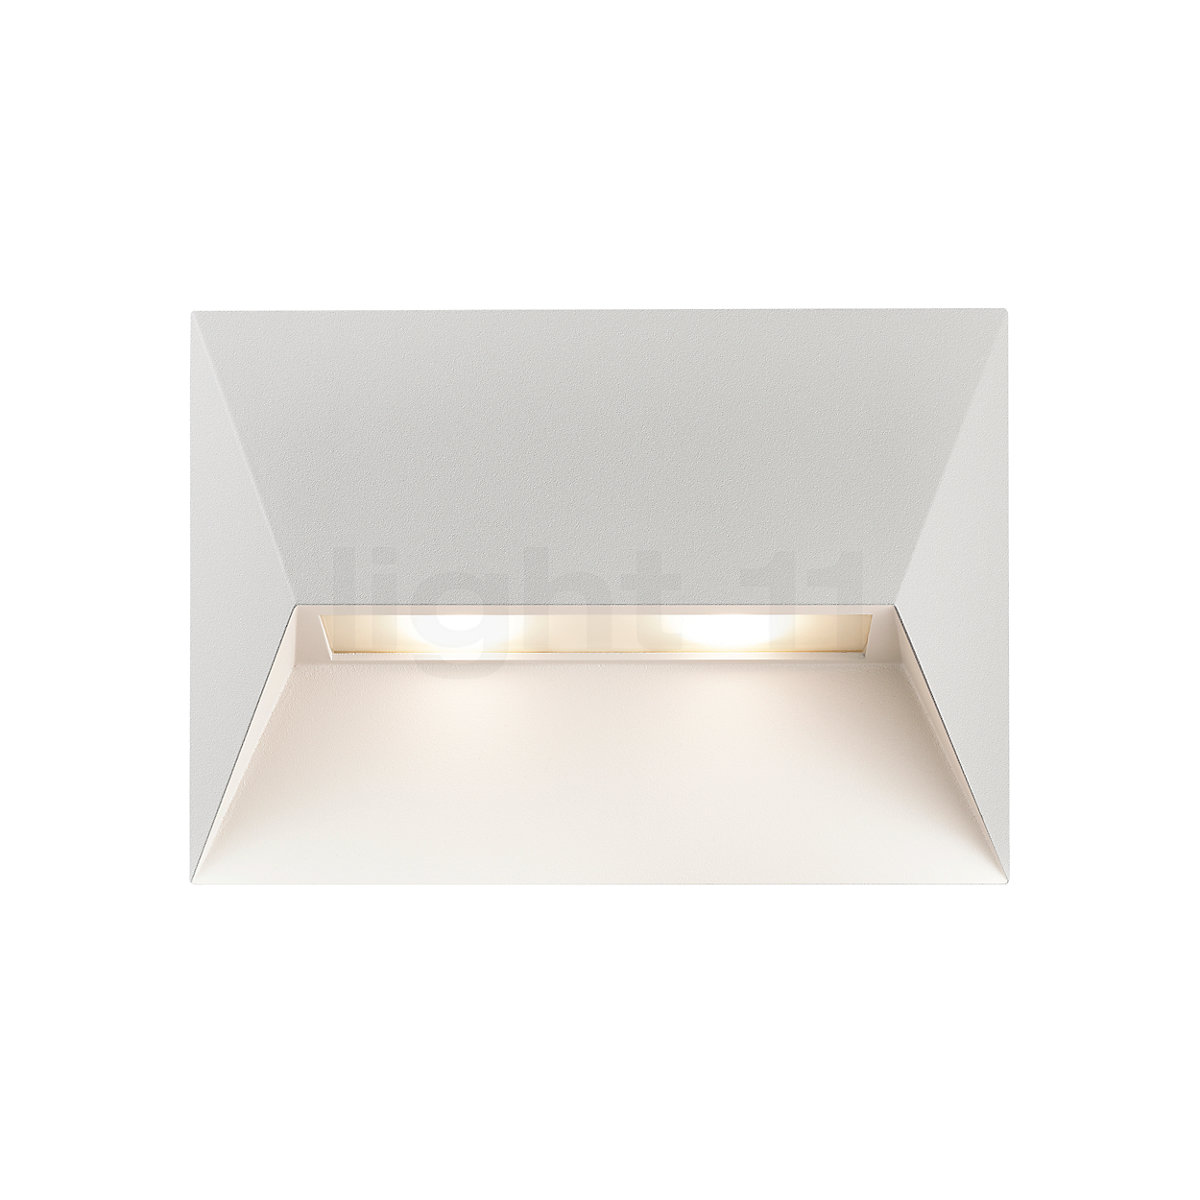 Buy Nordlux Pontio Wall Light at